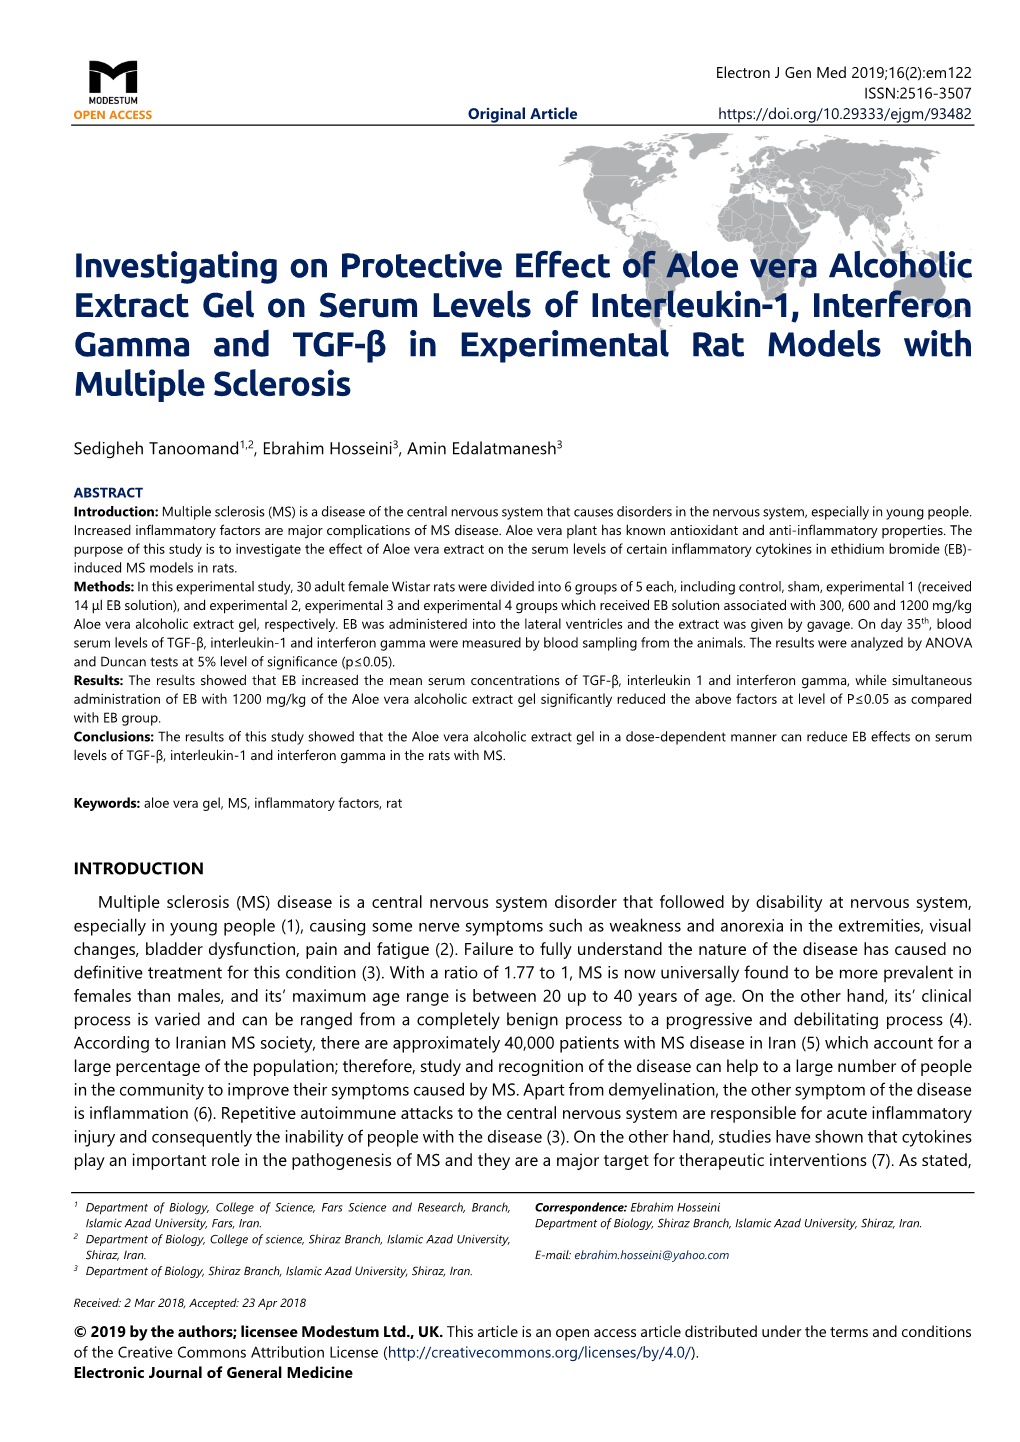 Investigating on Protective Effect of Aloe Vera Alcoholic Extract Gel On